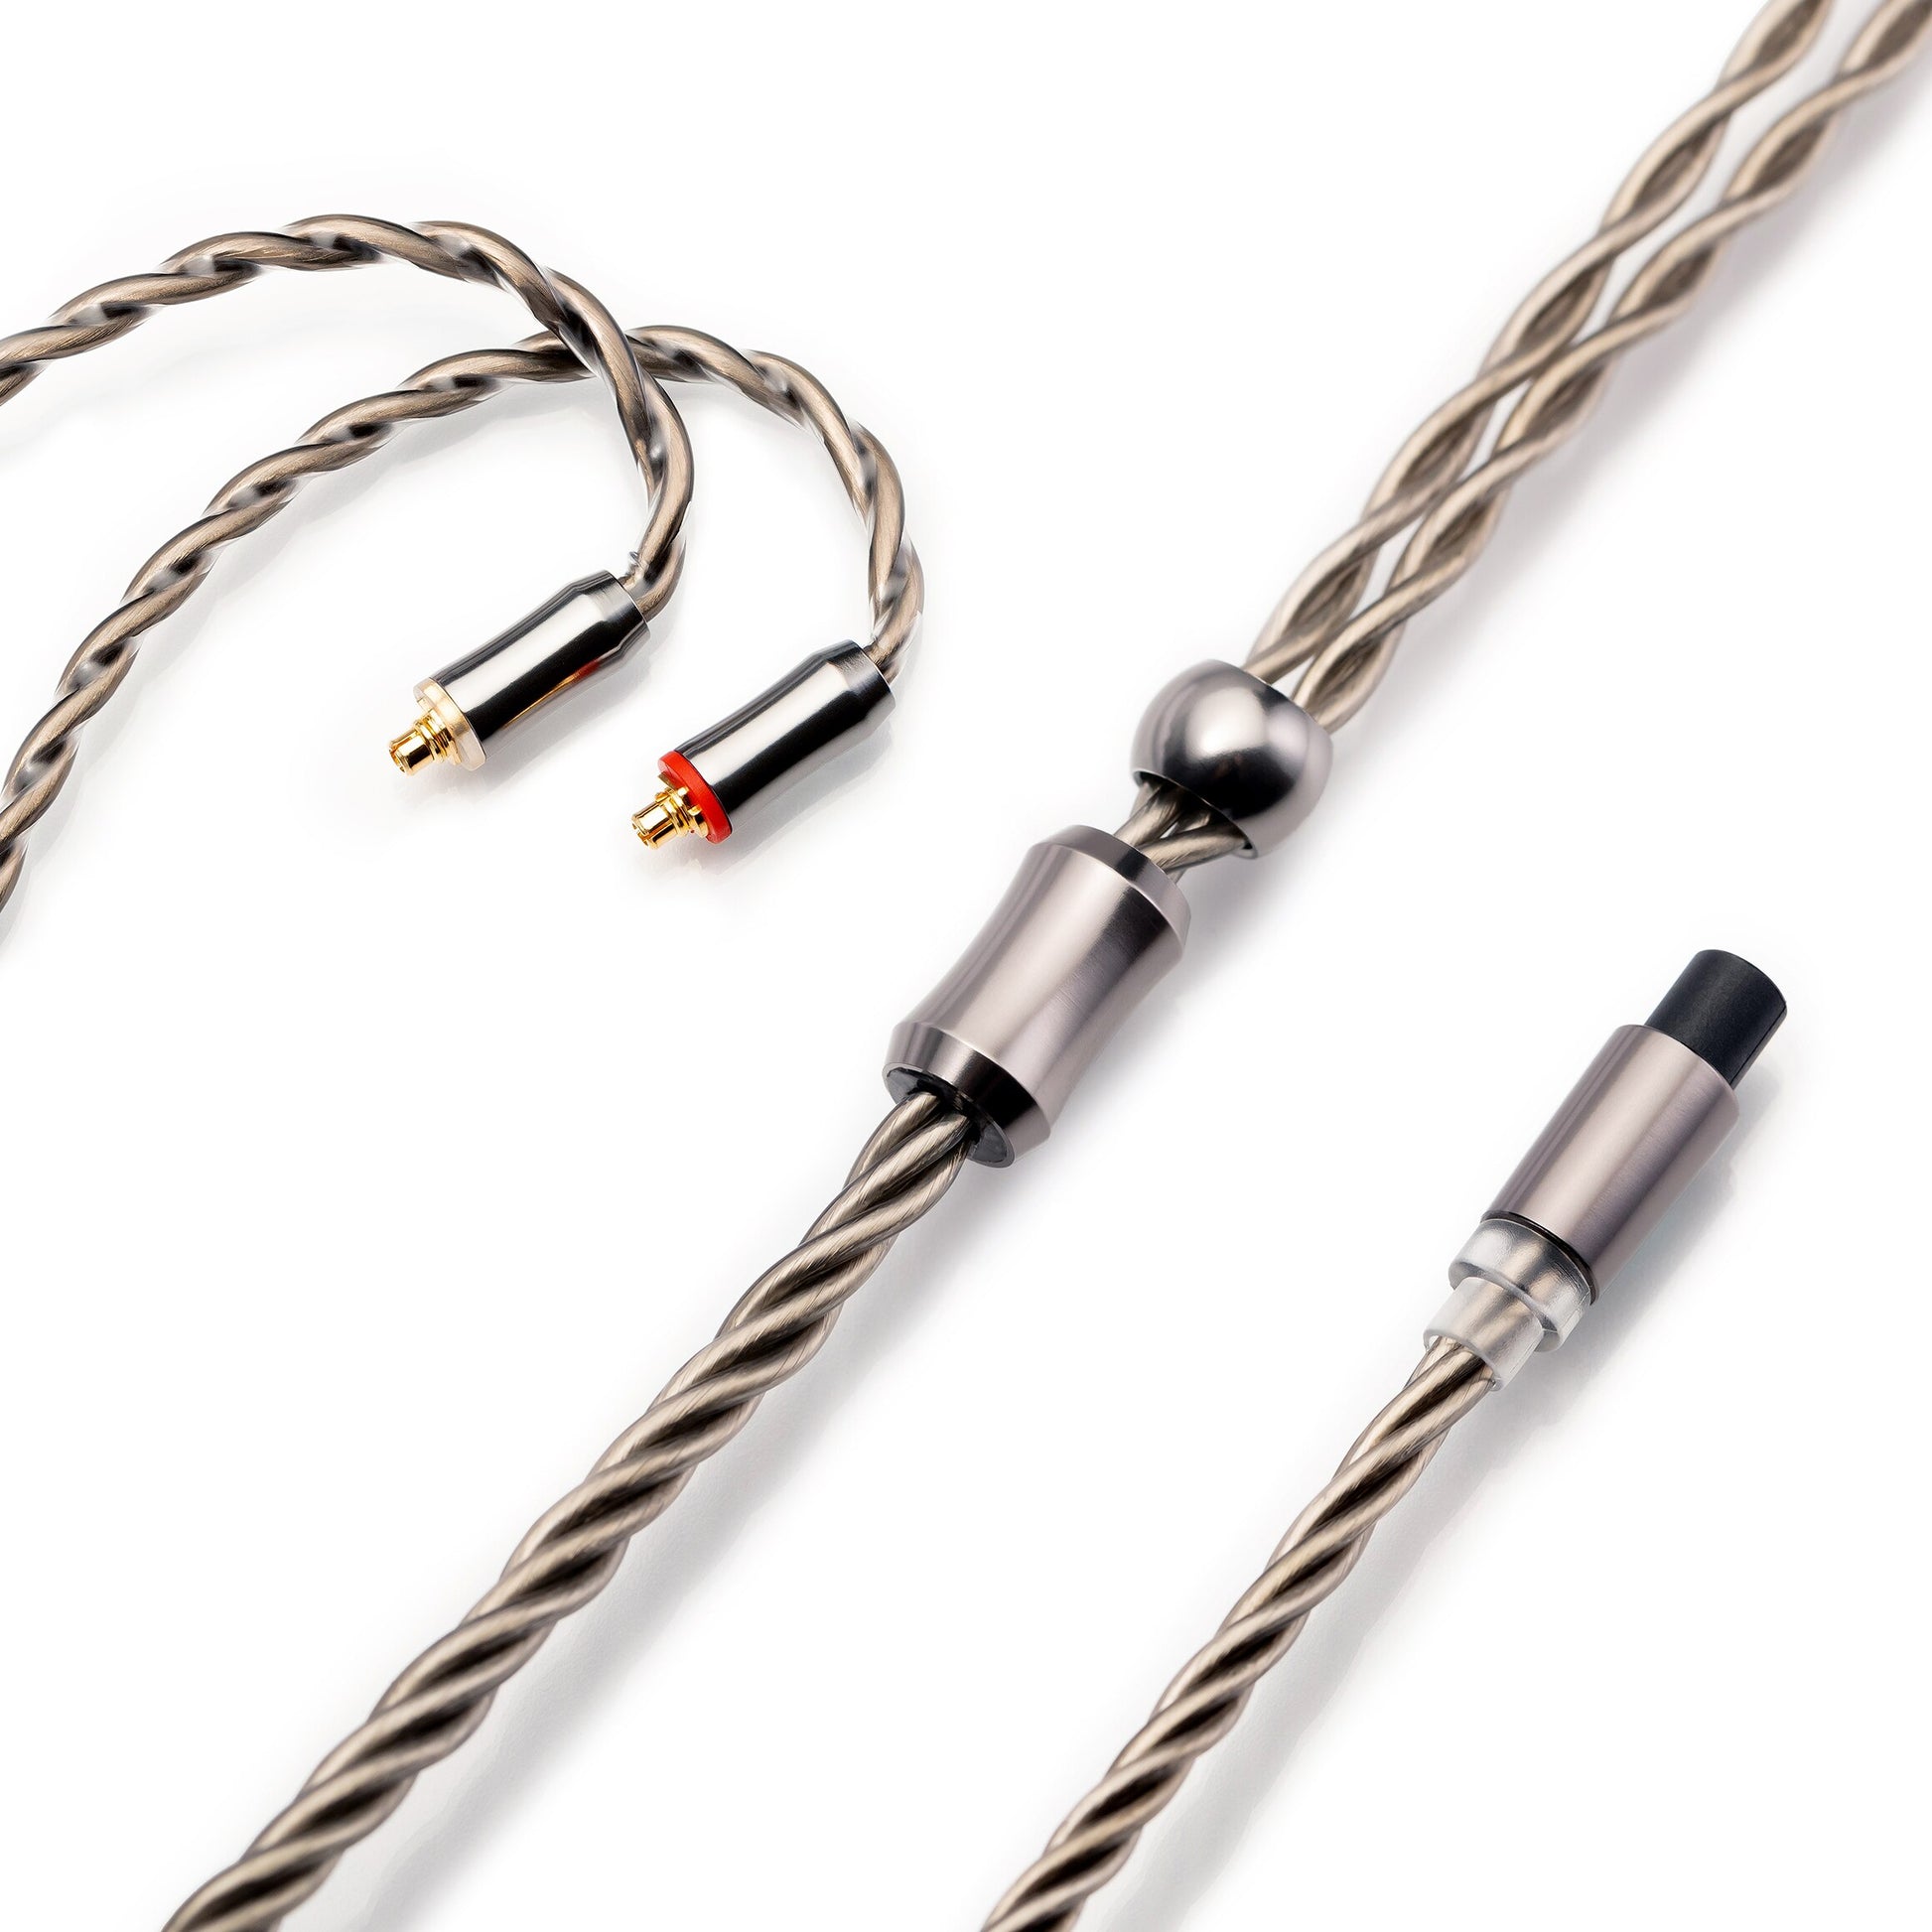 Kinera Dromi Modular Upgrade Cable (2.5+3.5+4.4), 6N OCC with silver plated,4 core twist braided, 0.78 2pin / MMCX connector - The HiFi Cat